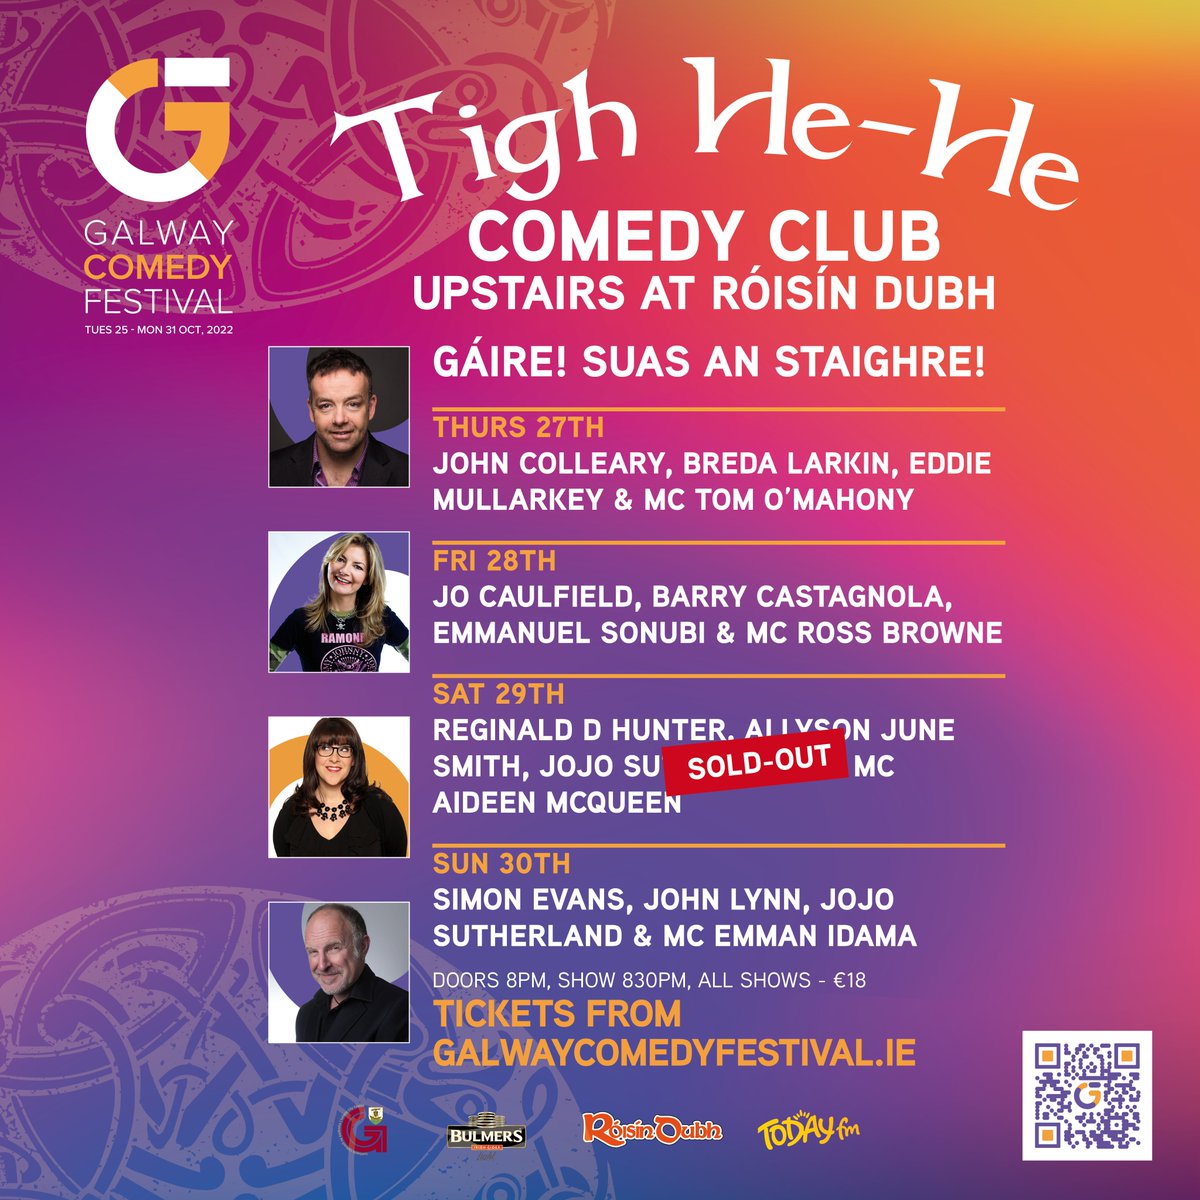 Initially launched in early May as a pop-up comedy club, Tigh He-He has proven a hit ever since with four different comedians each week. We have four great Tigh He-He line-ups for you in our upstairs room as part of #GCF22. Book now: galwaycomedyfestival.ie/venues/venue.h…